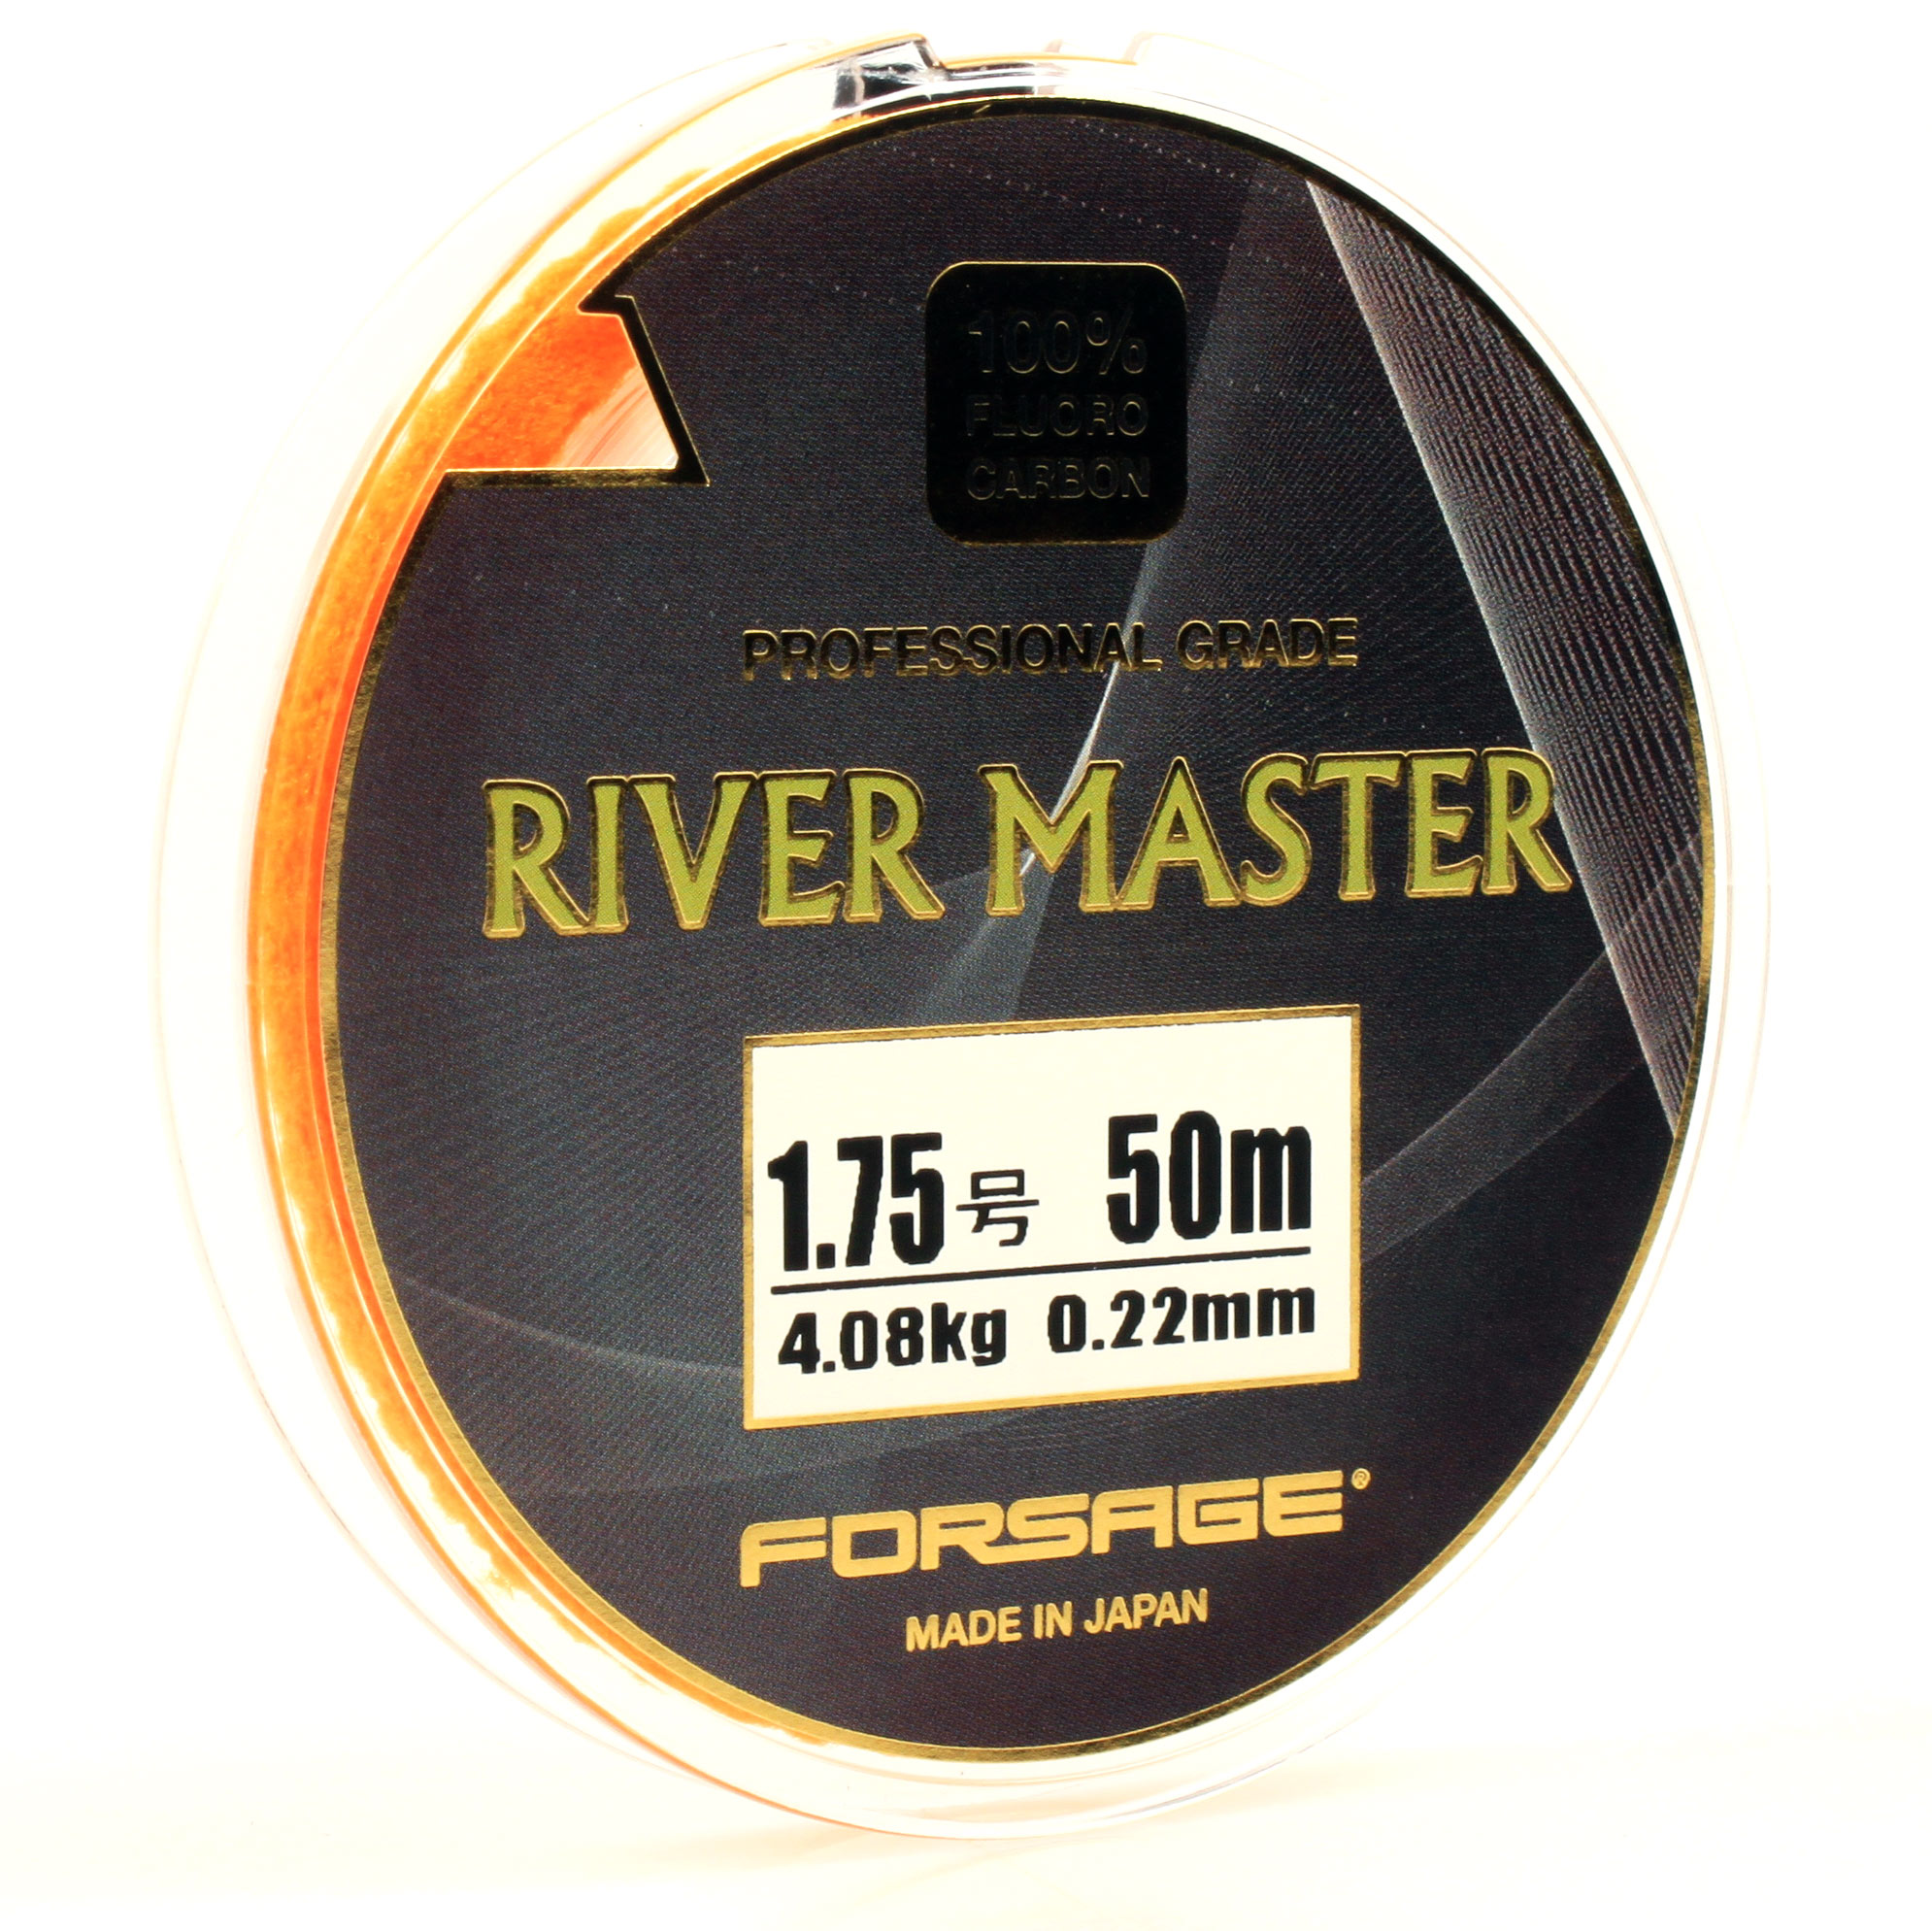 Forsage river master. Леска Forsage Military Fluorocarbon 40-50m. Шнур Forsage Nitro. Forsage River Master s-5`11 180cm 1-7 g. Кастингфорс Ривер мастер.